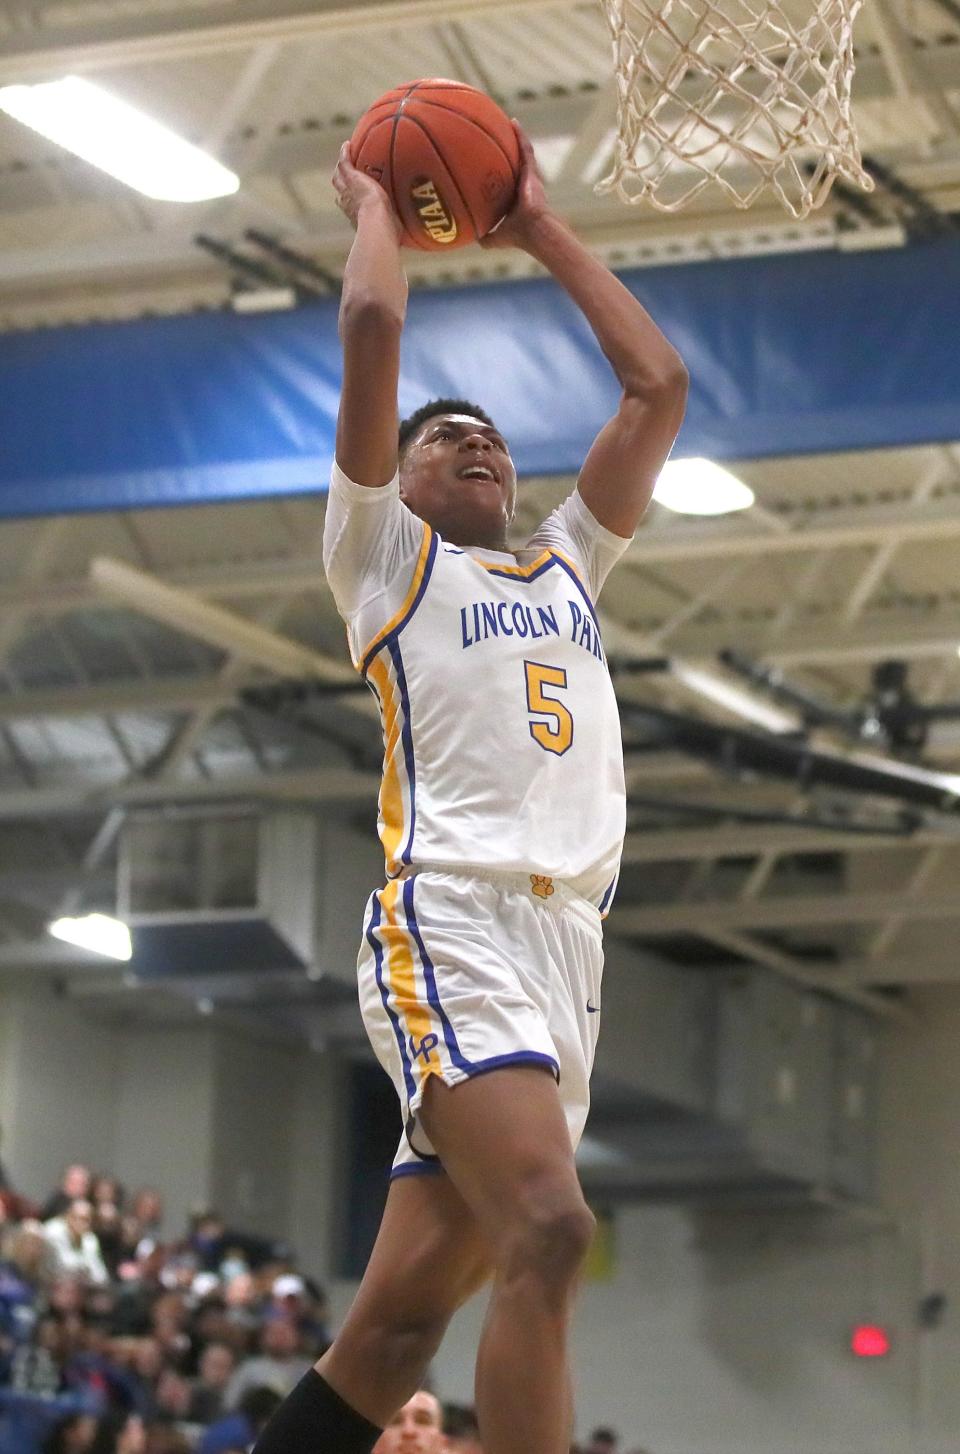 Lincoln Park's Meleek Thomas prepares to dunk the ball during the first half of the PIAA 4A Playoff game against South Allegheny Friday night at Lincoln Park Performing Arts Charter School.